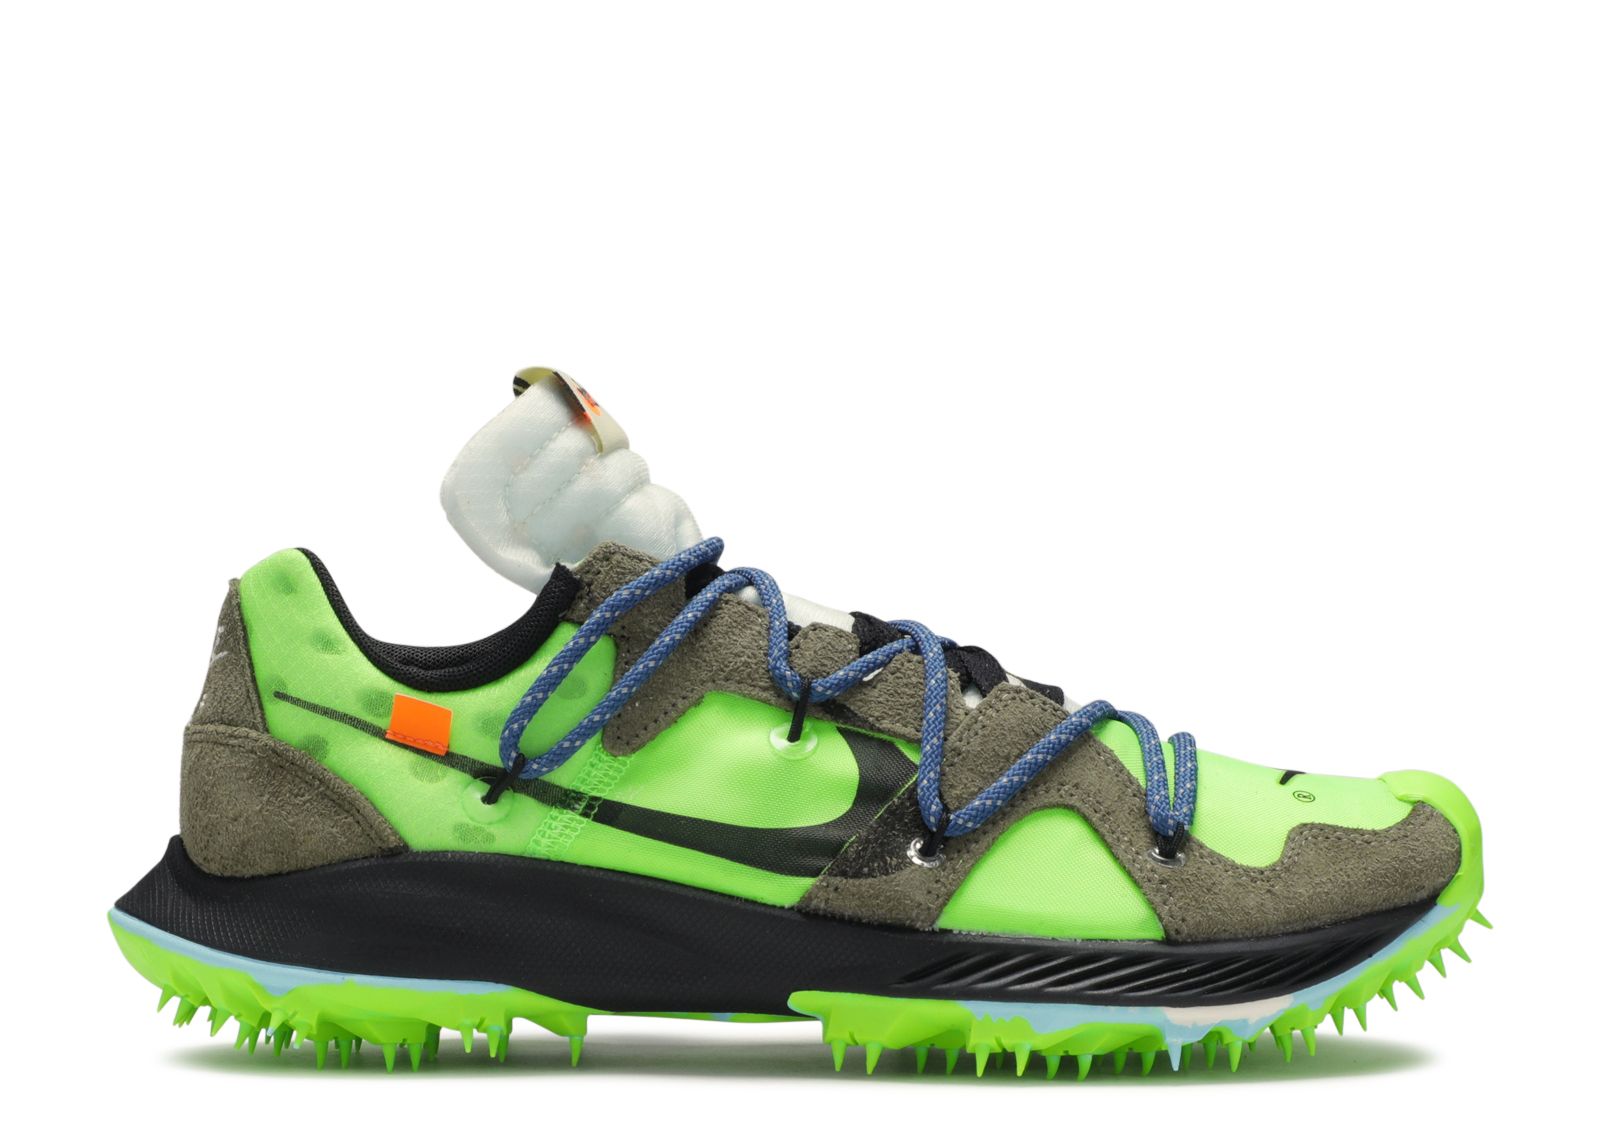 Кроссовки Nike Off-White X Wmns Air Zoom Terra Kiger 5 'Athlete In Progress - Electric Green', зеленый кроссовки nike sportswear zoom air fire pearl white white pale ivory iced lilac barely green